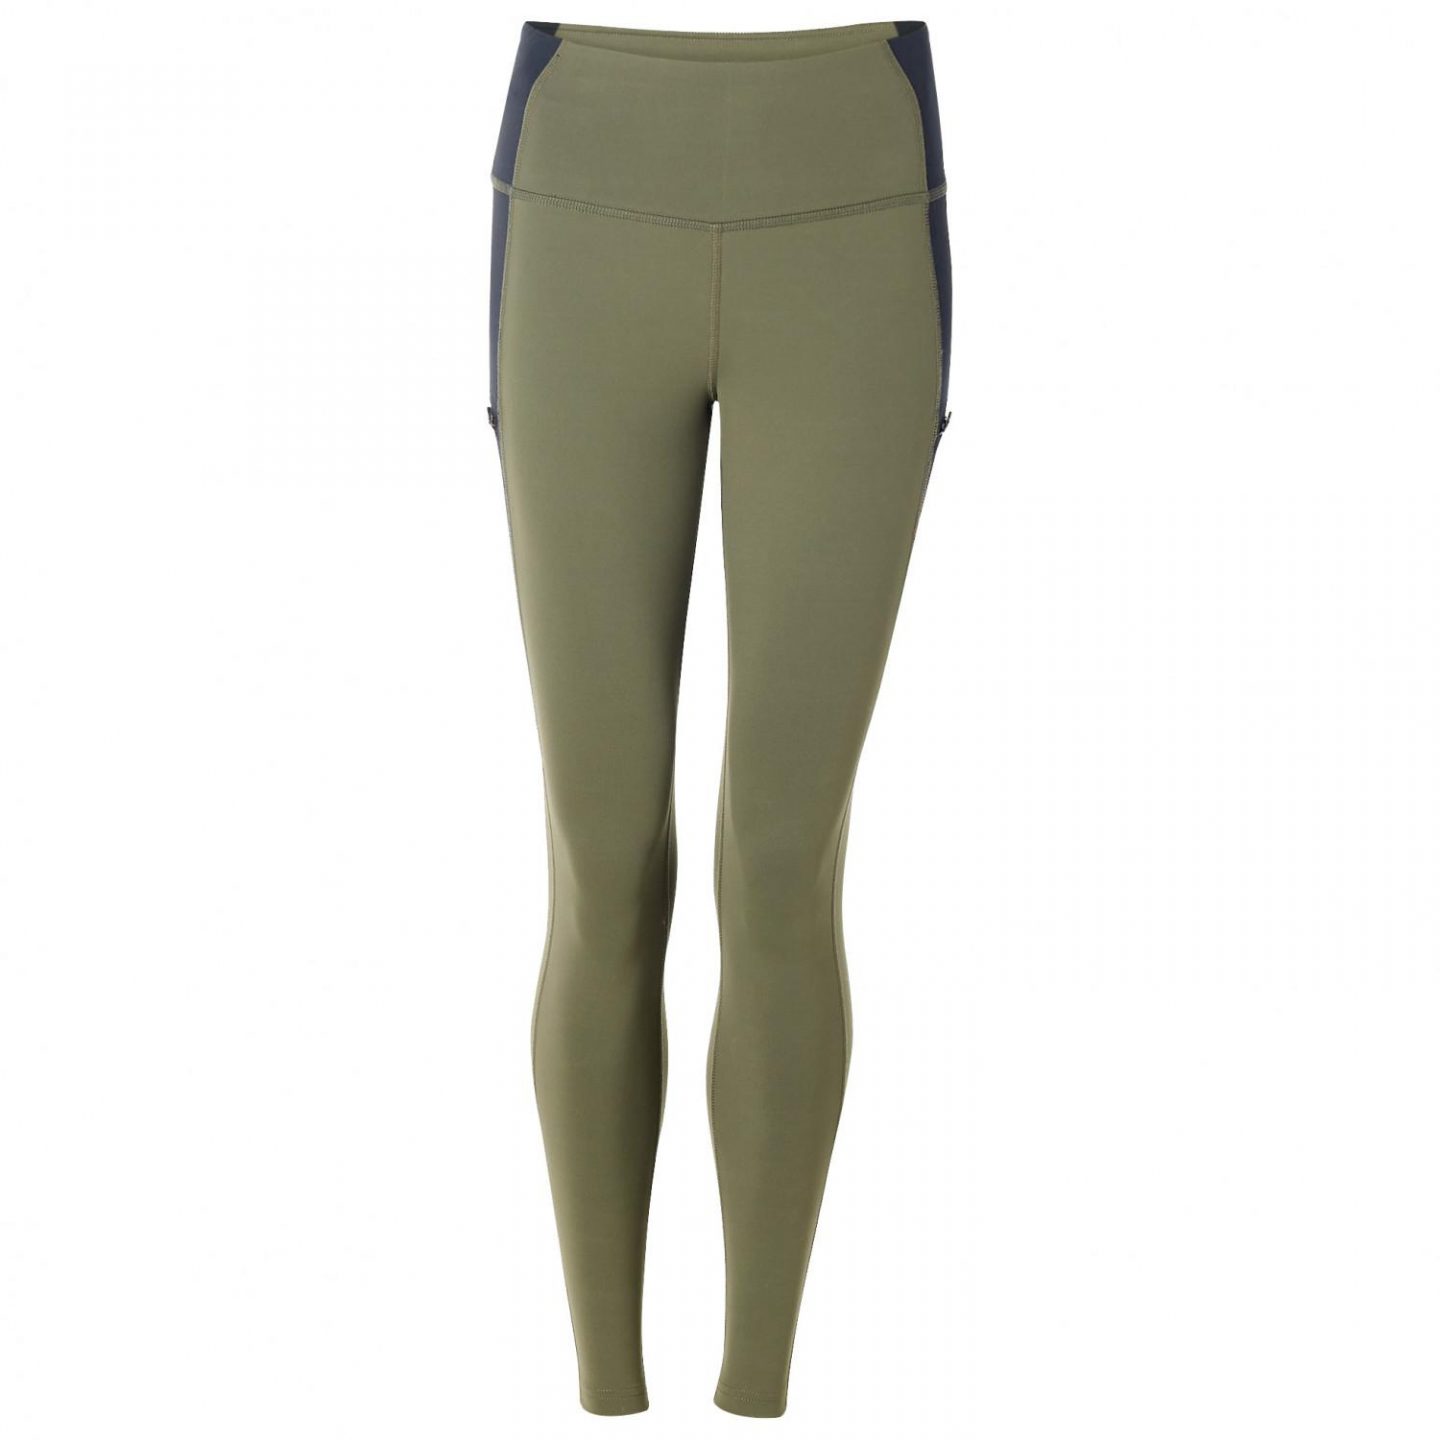 The Best Hiking Trousers For Women